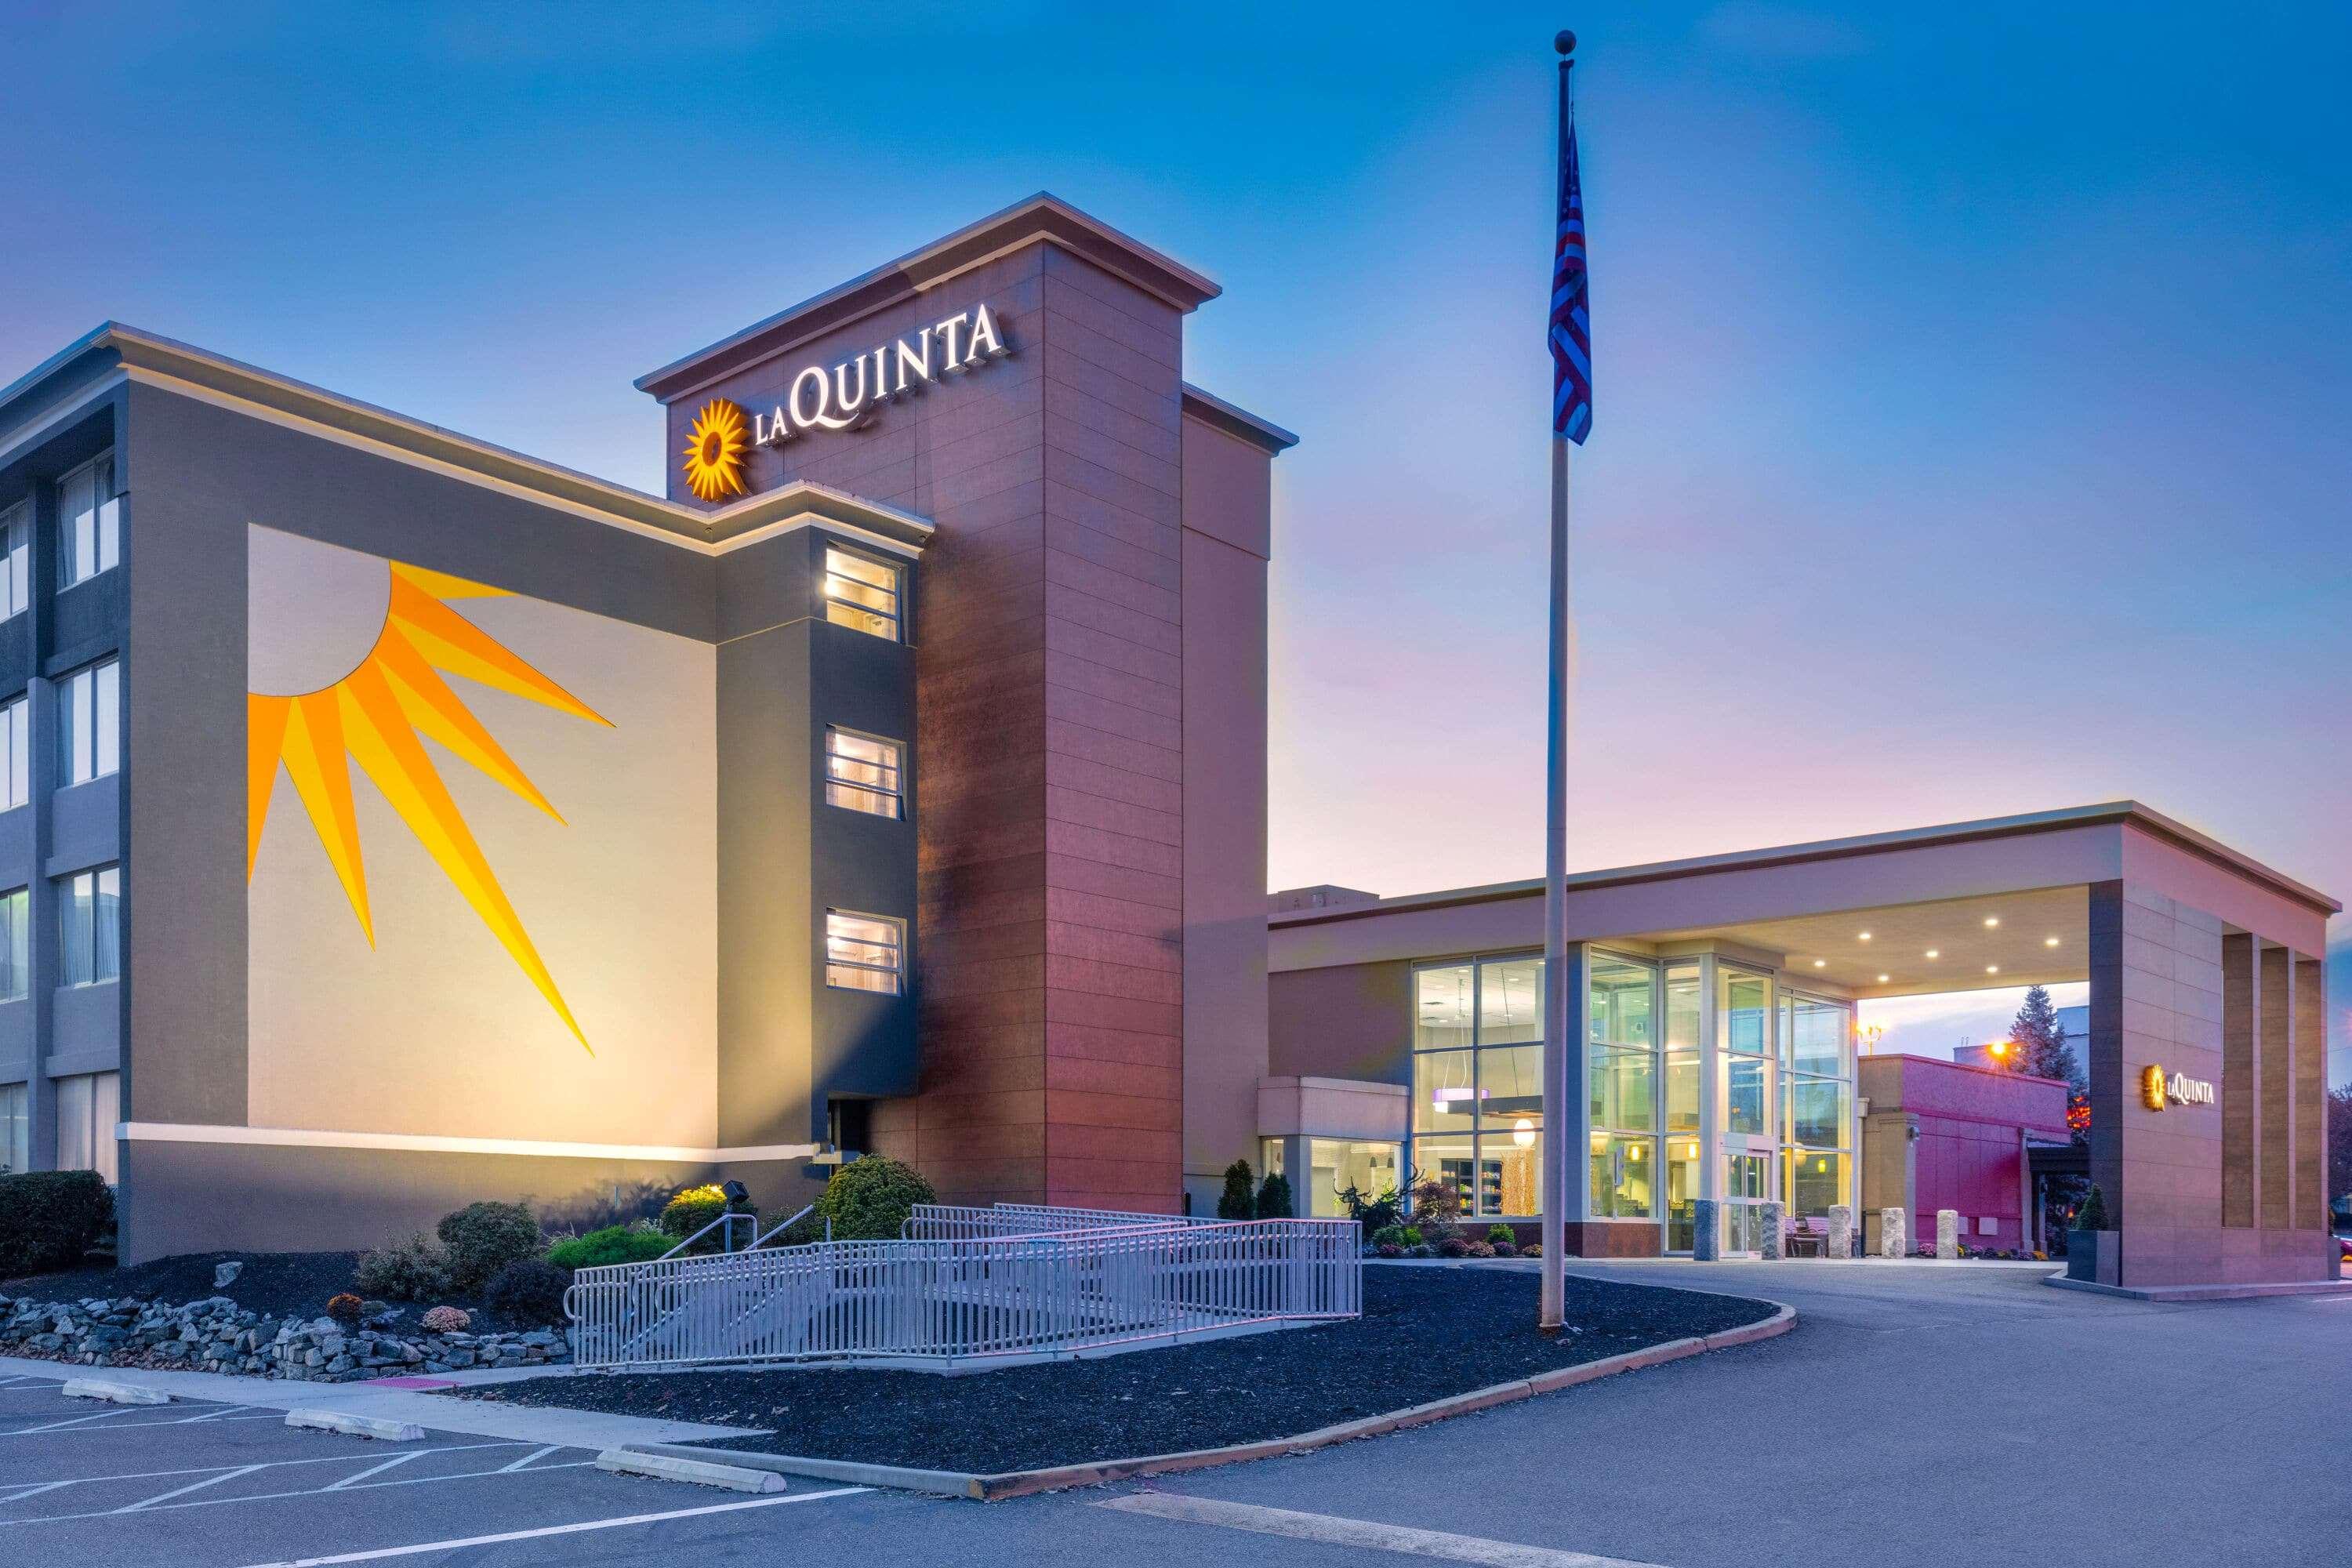 La Quinta Inn & Suites by Wyndham Clifton/Rutherford image